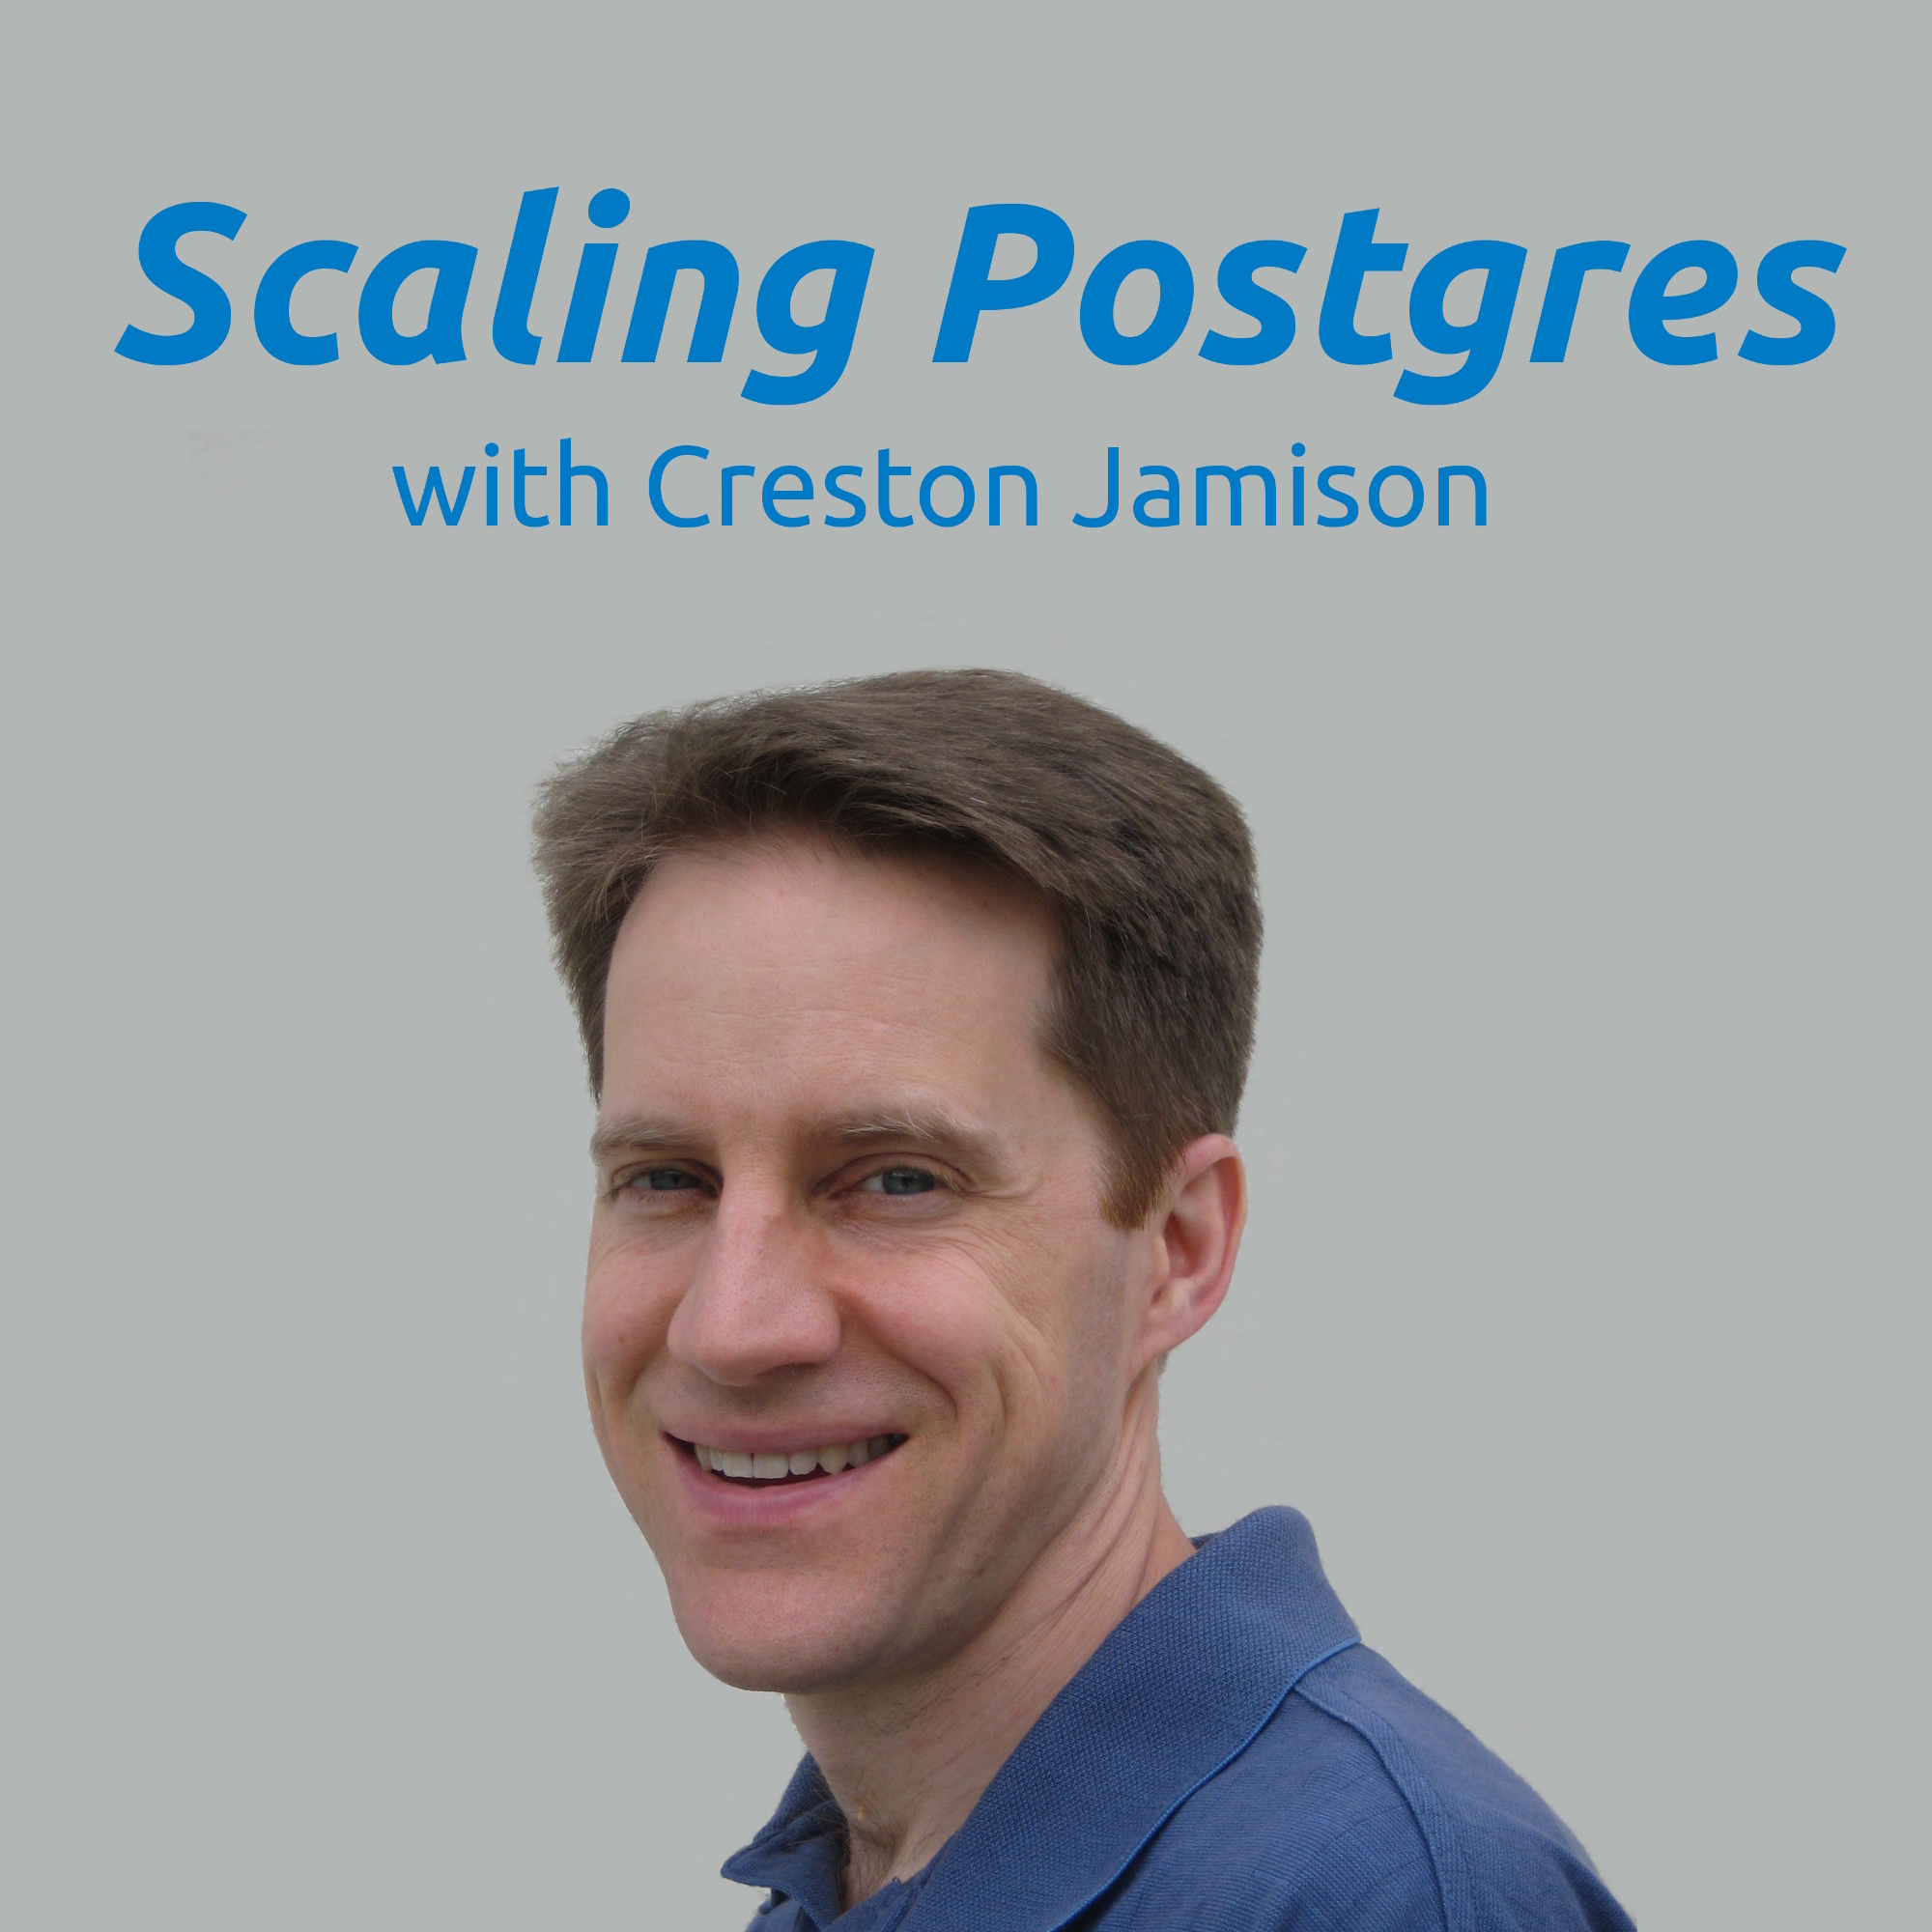 HNSW Indexes, Vacuuming Bloat, Watch Me Now, Connections | Scaling Postgres 281